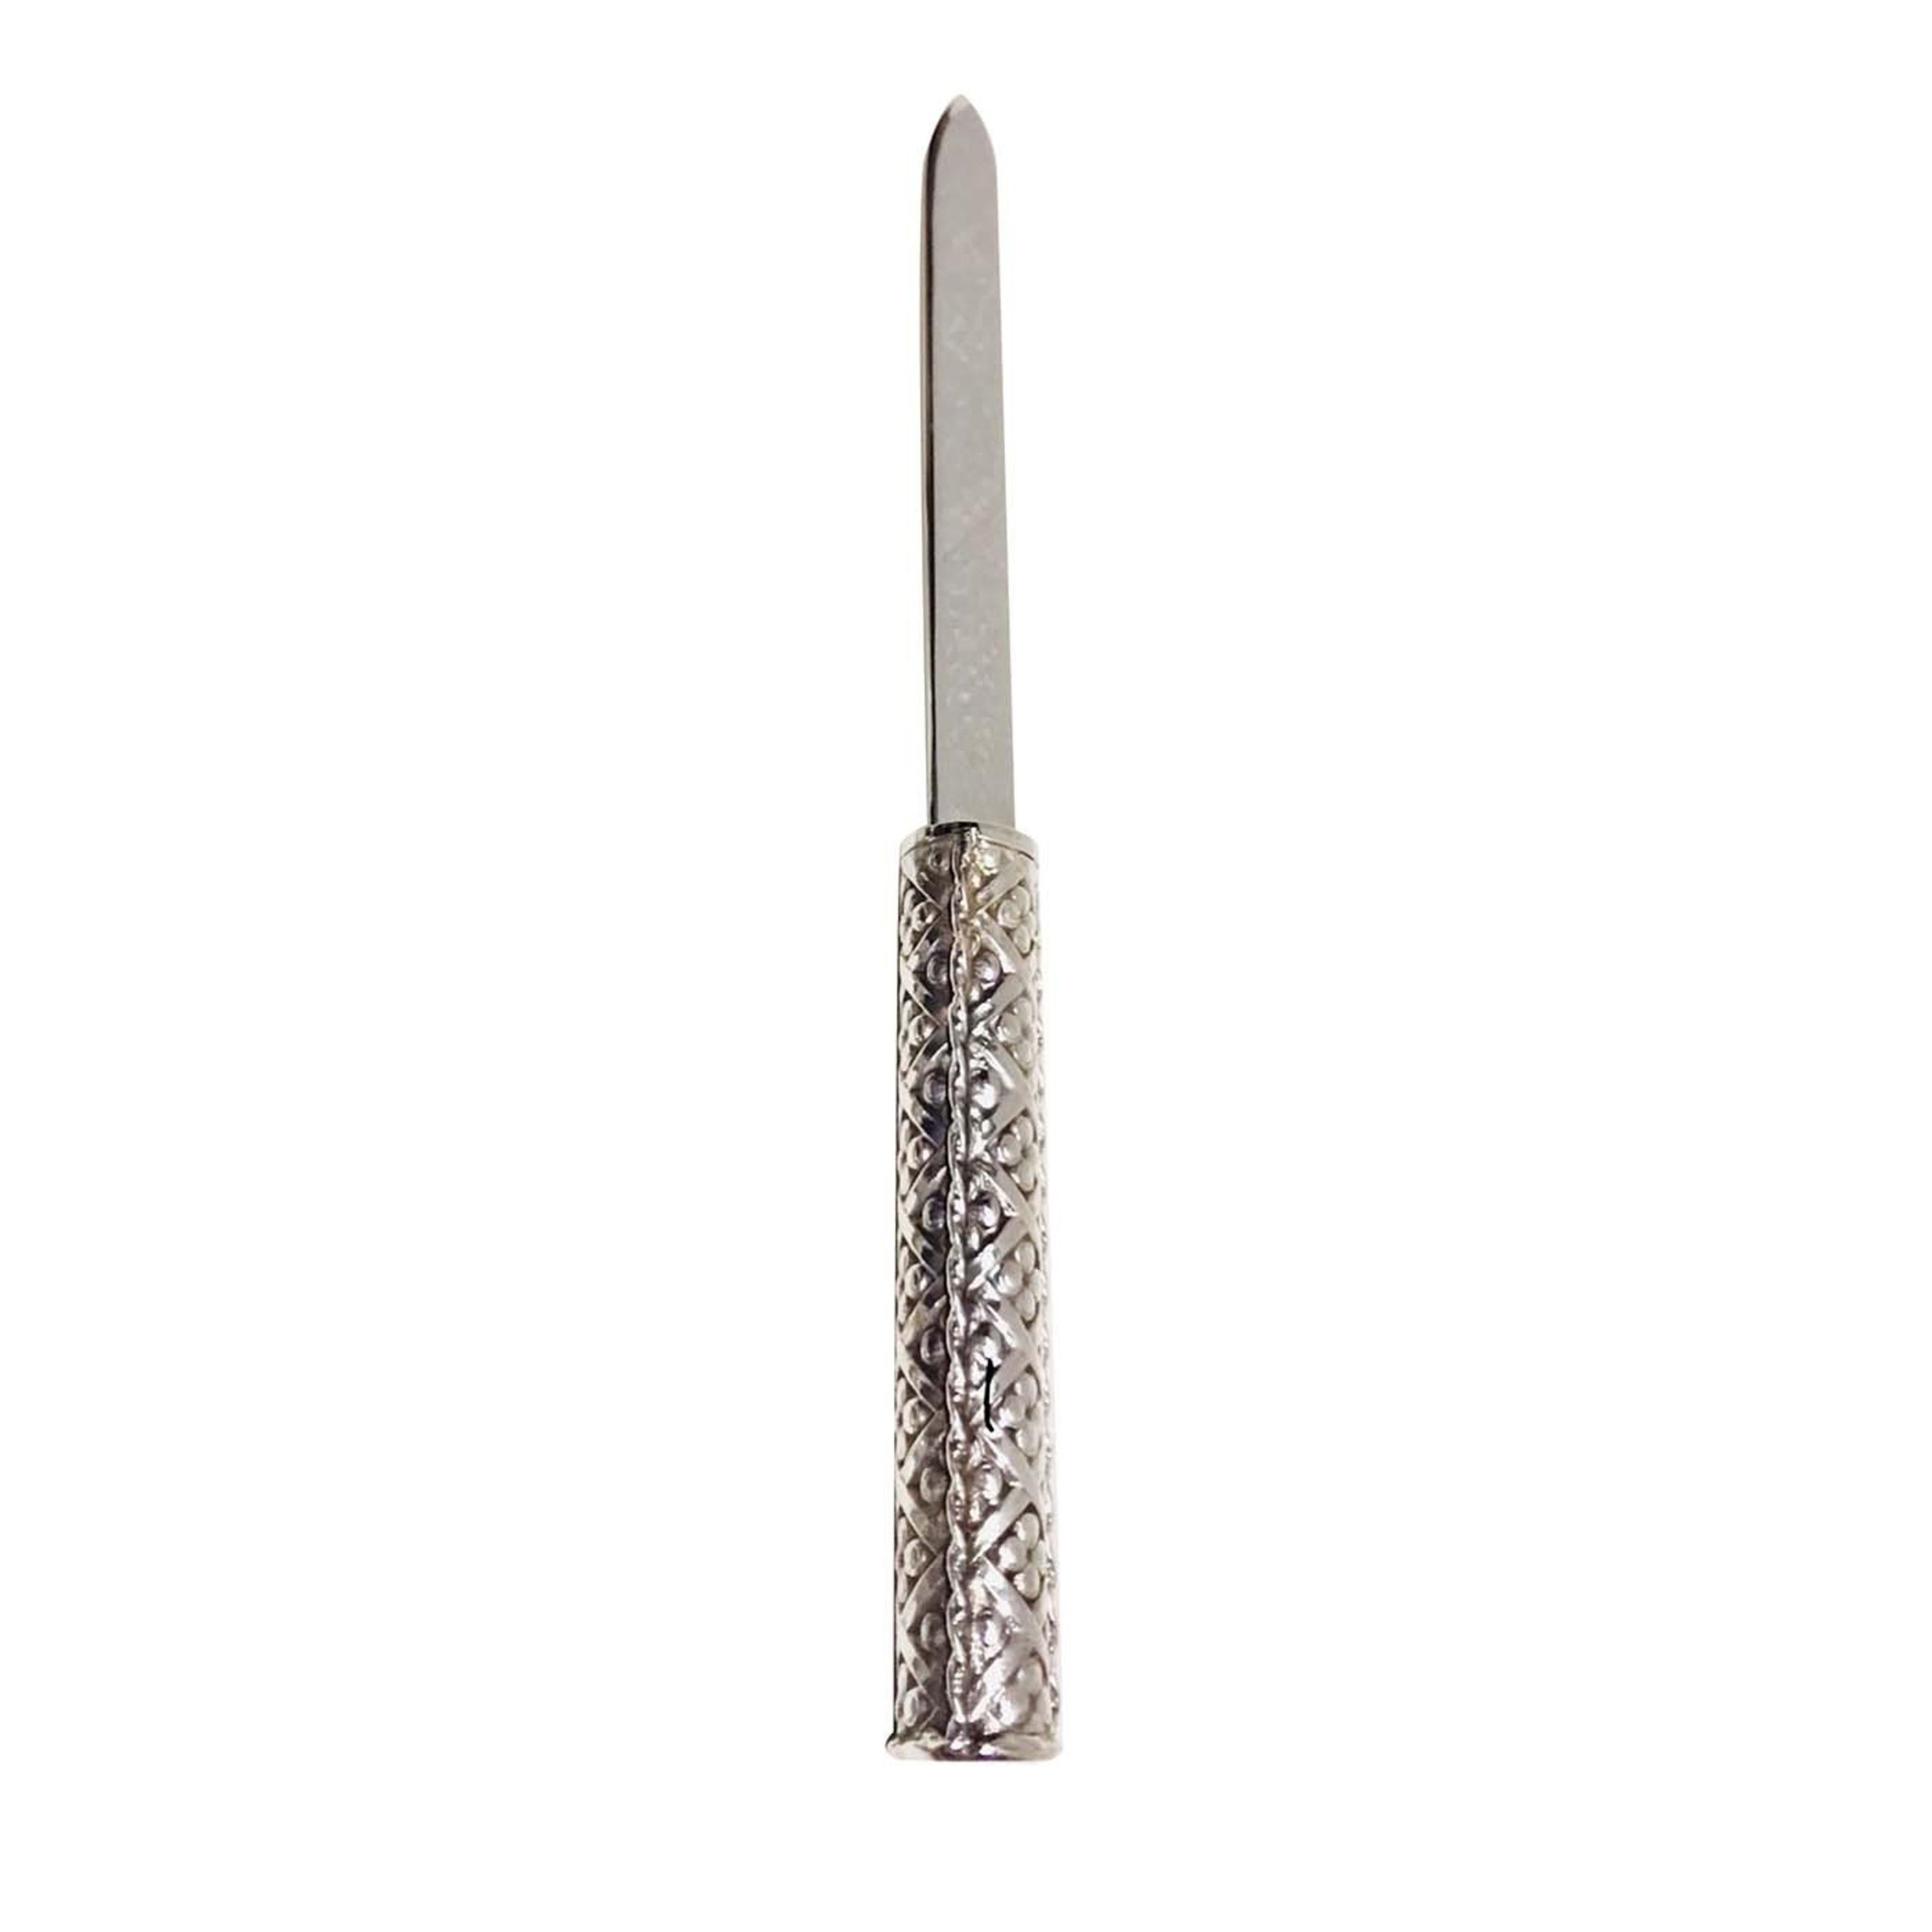 This superb Letter Opener in stunning Sterling Silver is made with the lost wax casting process. Provided with a warranty and elegant gift packaging, the exquisite desk item is 100% made in Italy and is also available as a set with the matching